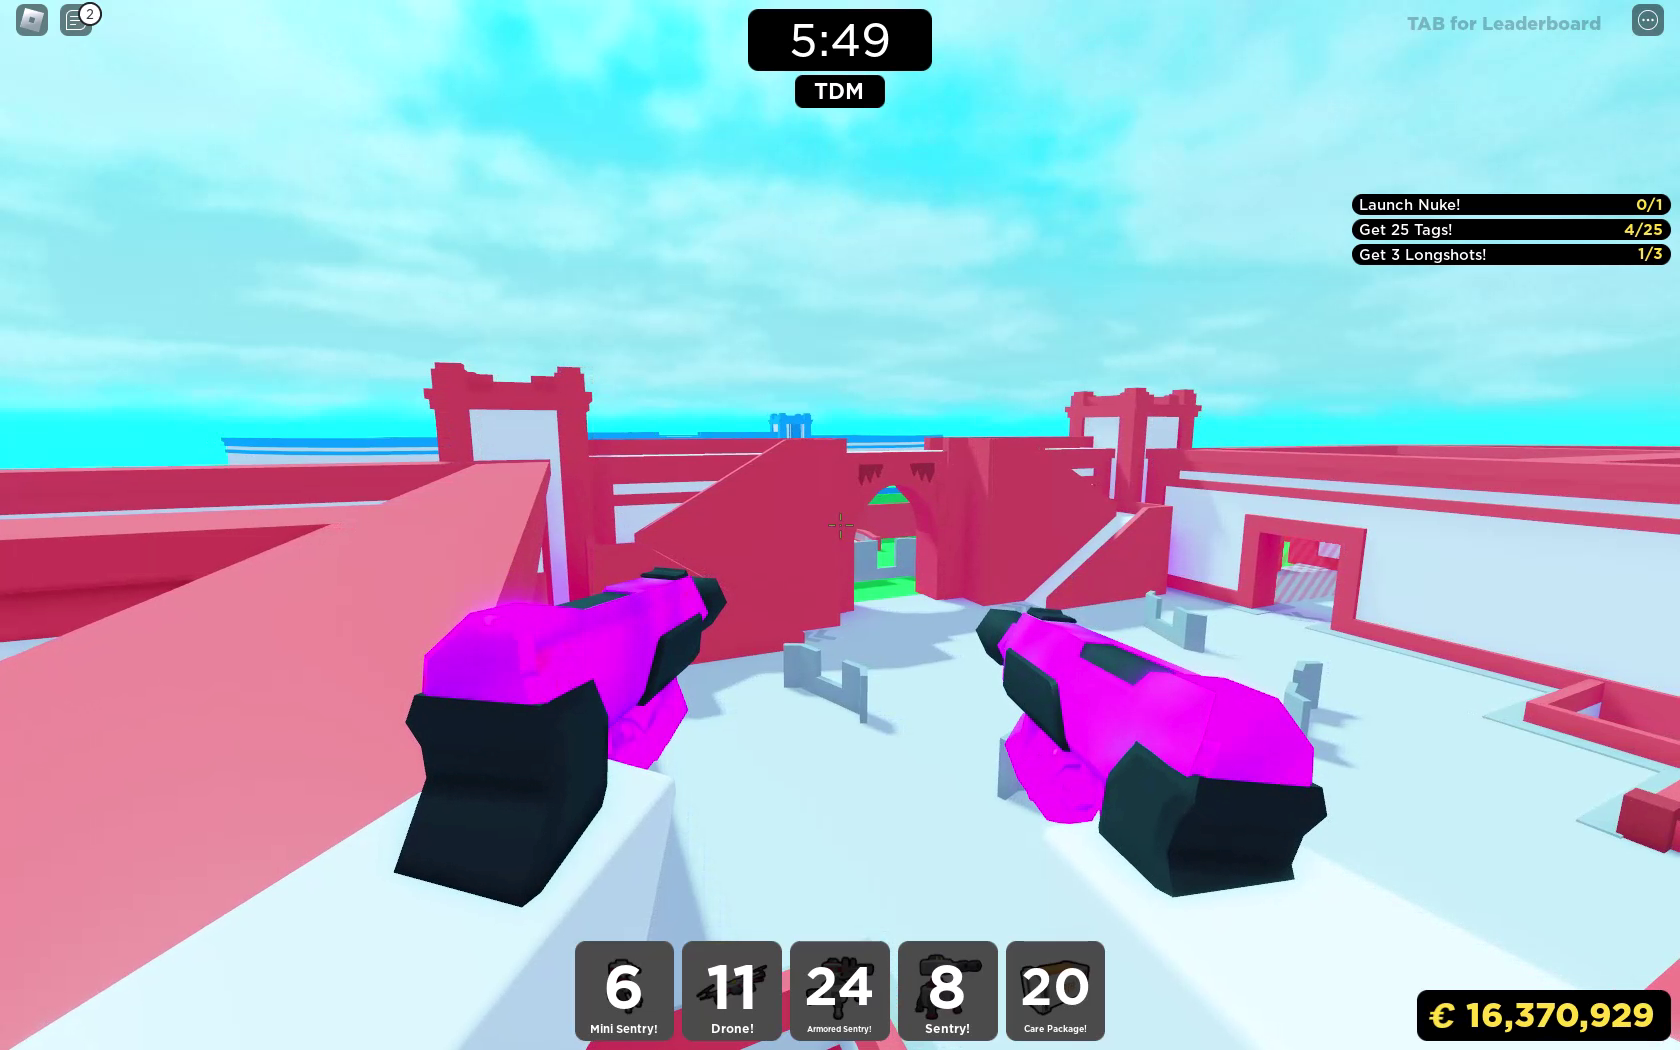 Big Paintball on Roblox Introduces New Maps and More in Latest